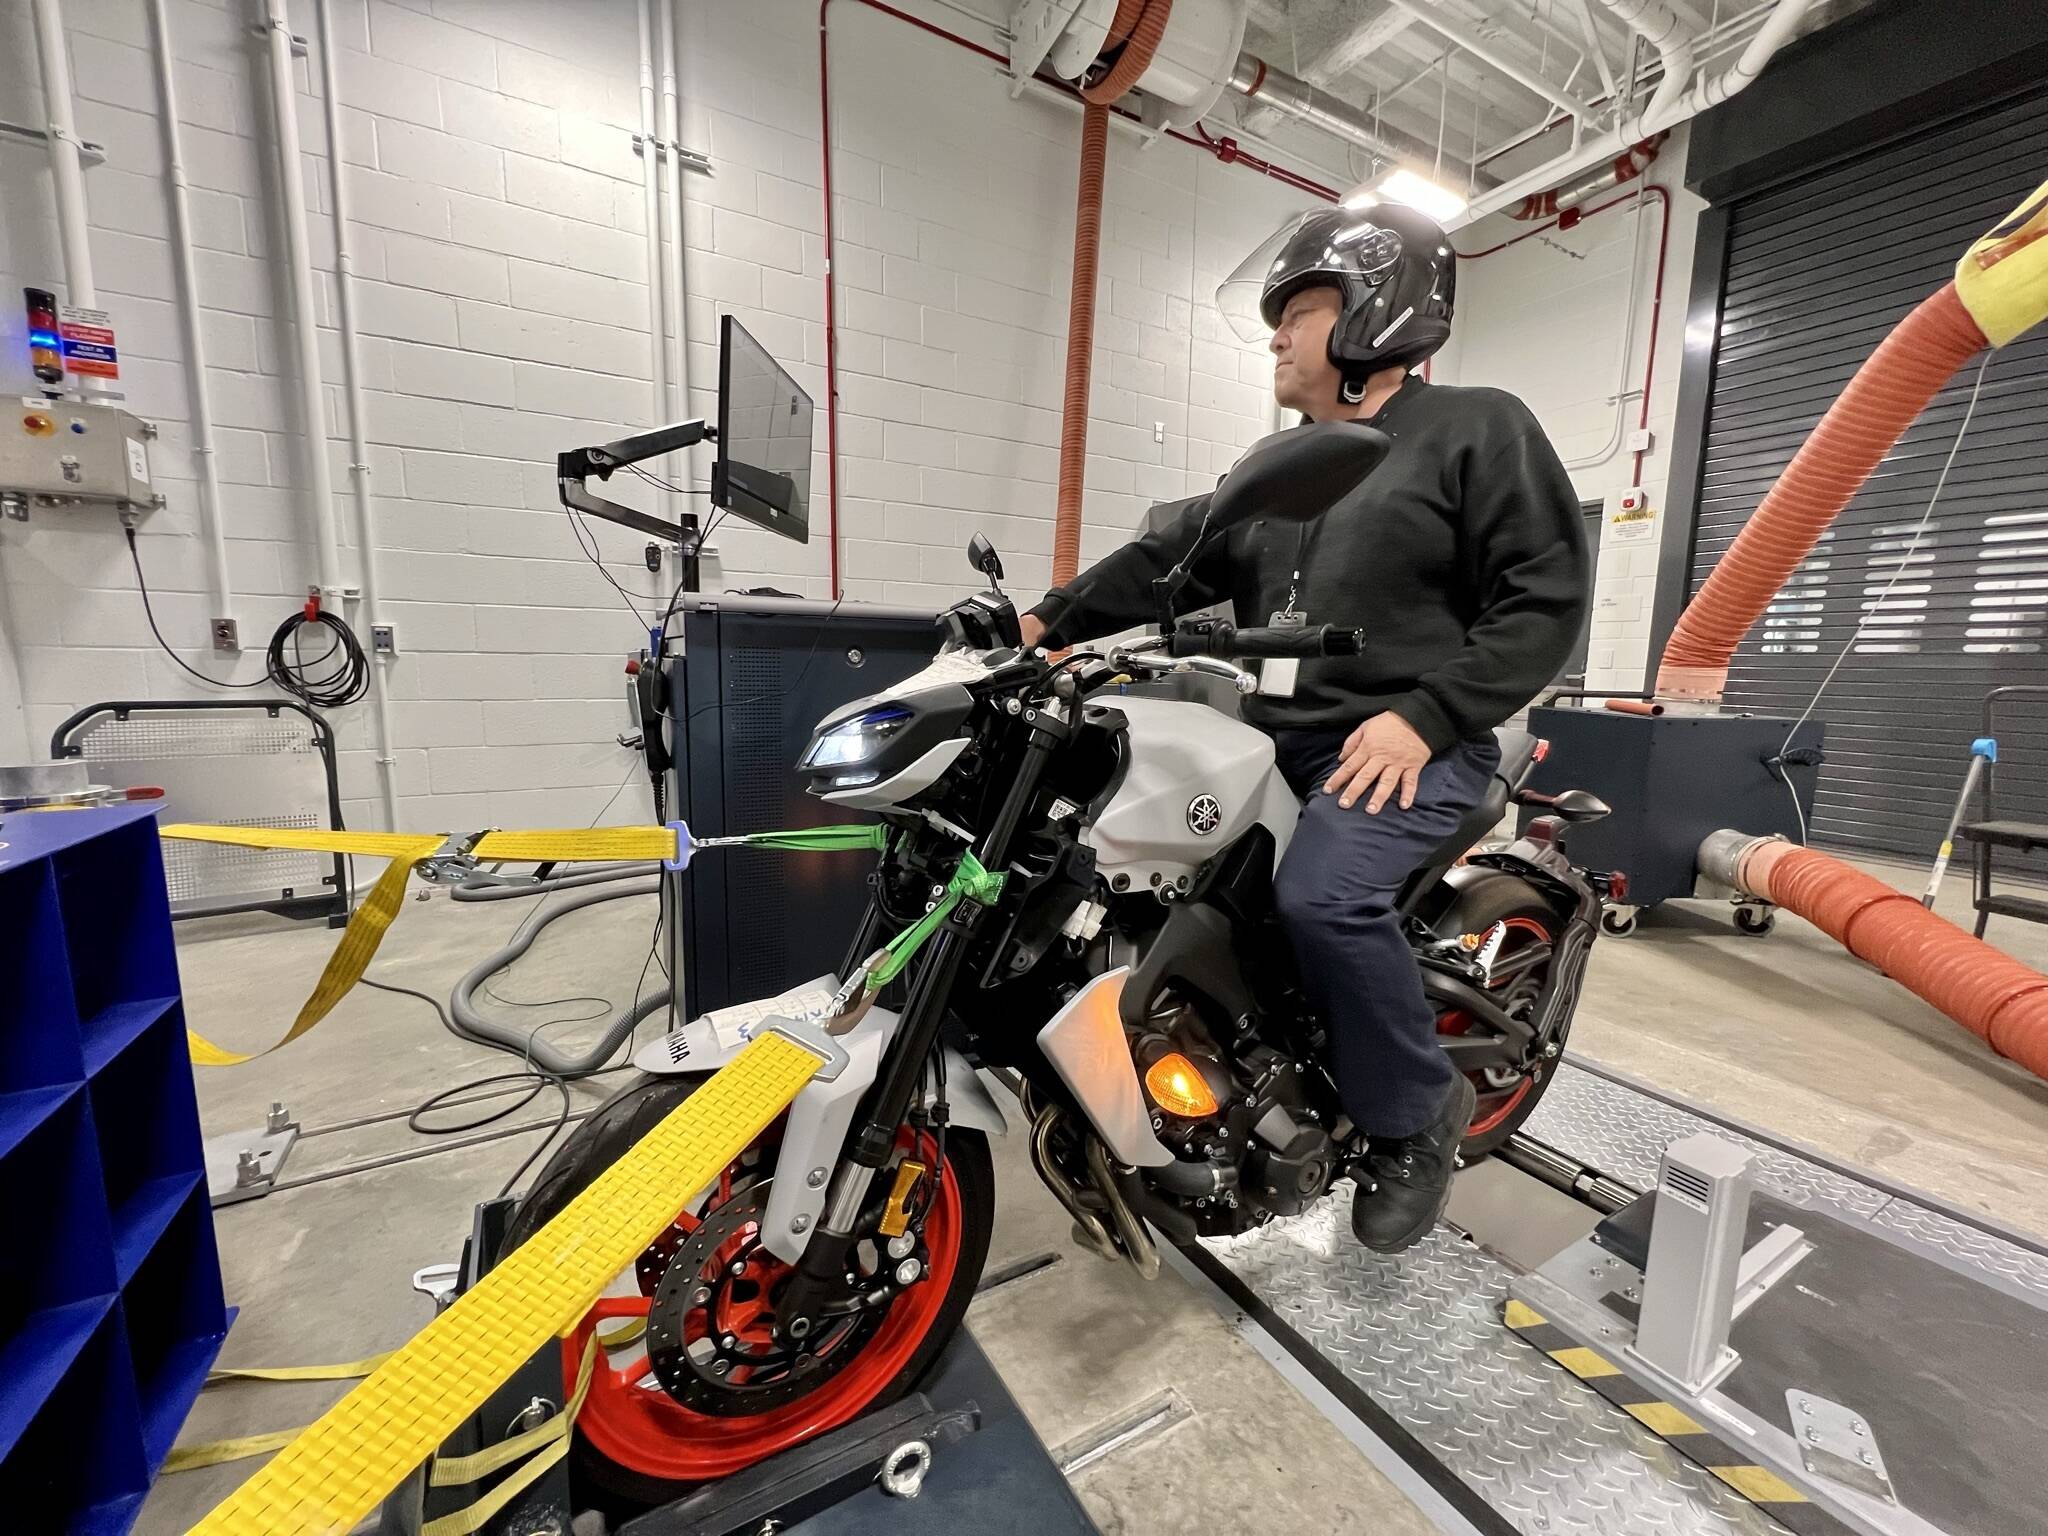 Emissions testing of a motorcycle in the California Air Resources Board's new lab in the city of Riverside. (Photo: Saul Gonzalez/KQED)